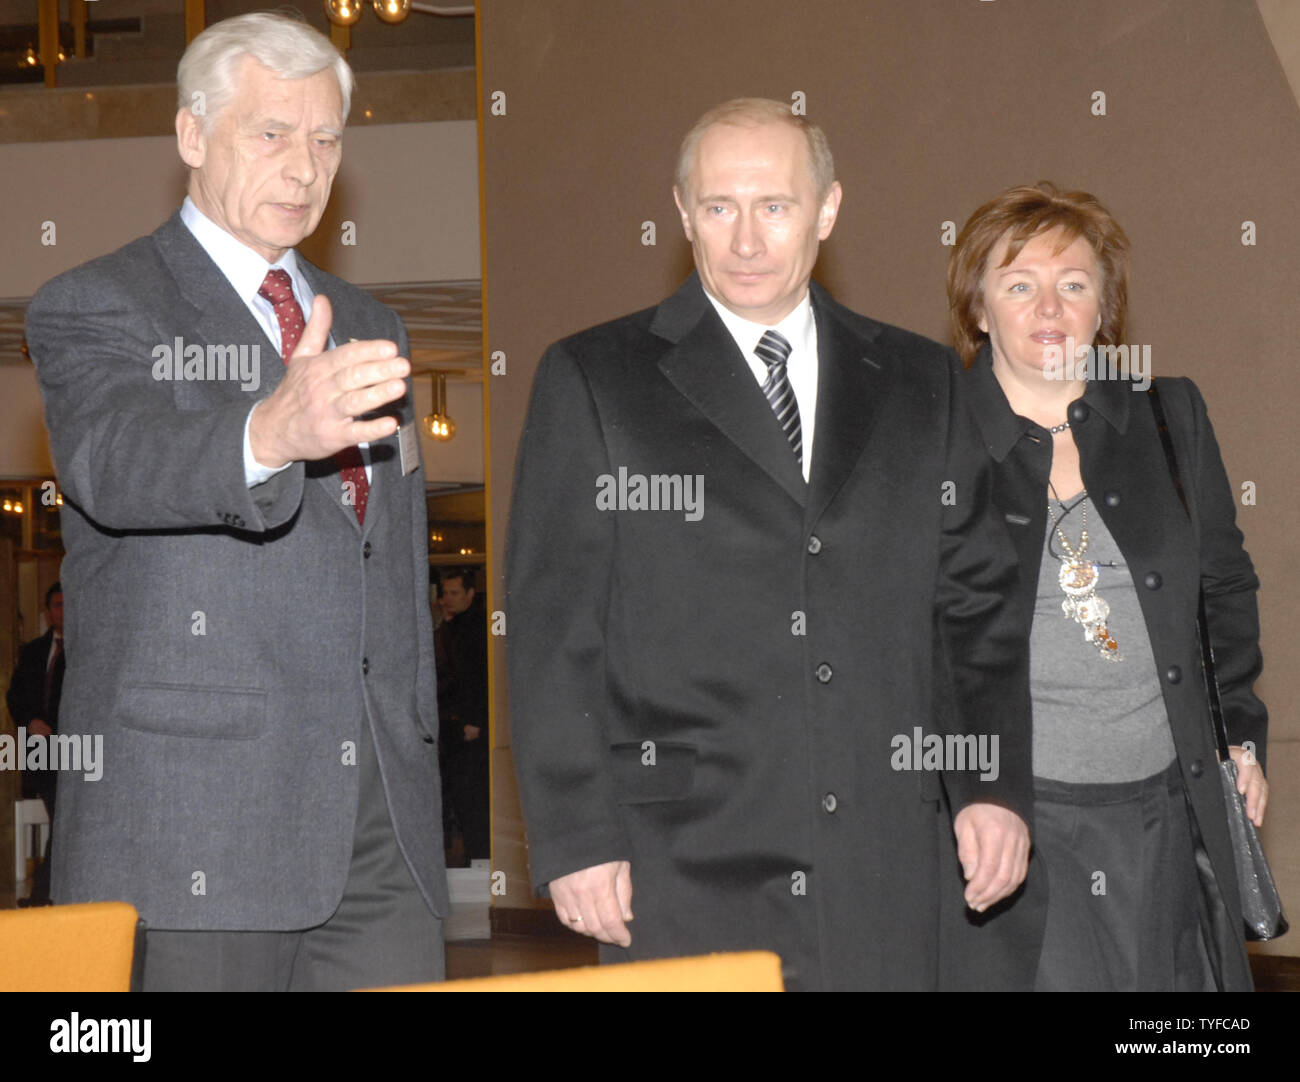 Russian President Vladimir Putin waves as he and his wife Lyudmila arrive to vote in the presidential election at a polling station in Moscow, on March 2, 2008. (UPI Photo/Stringer) Stock Photo